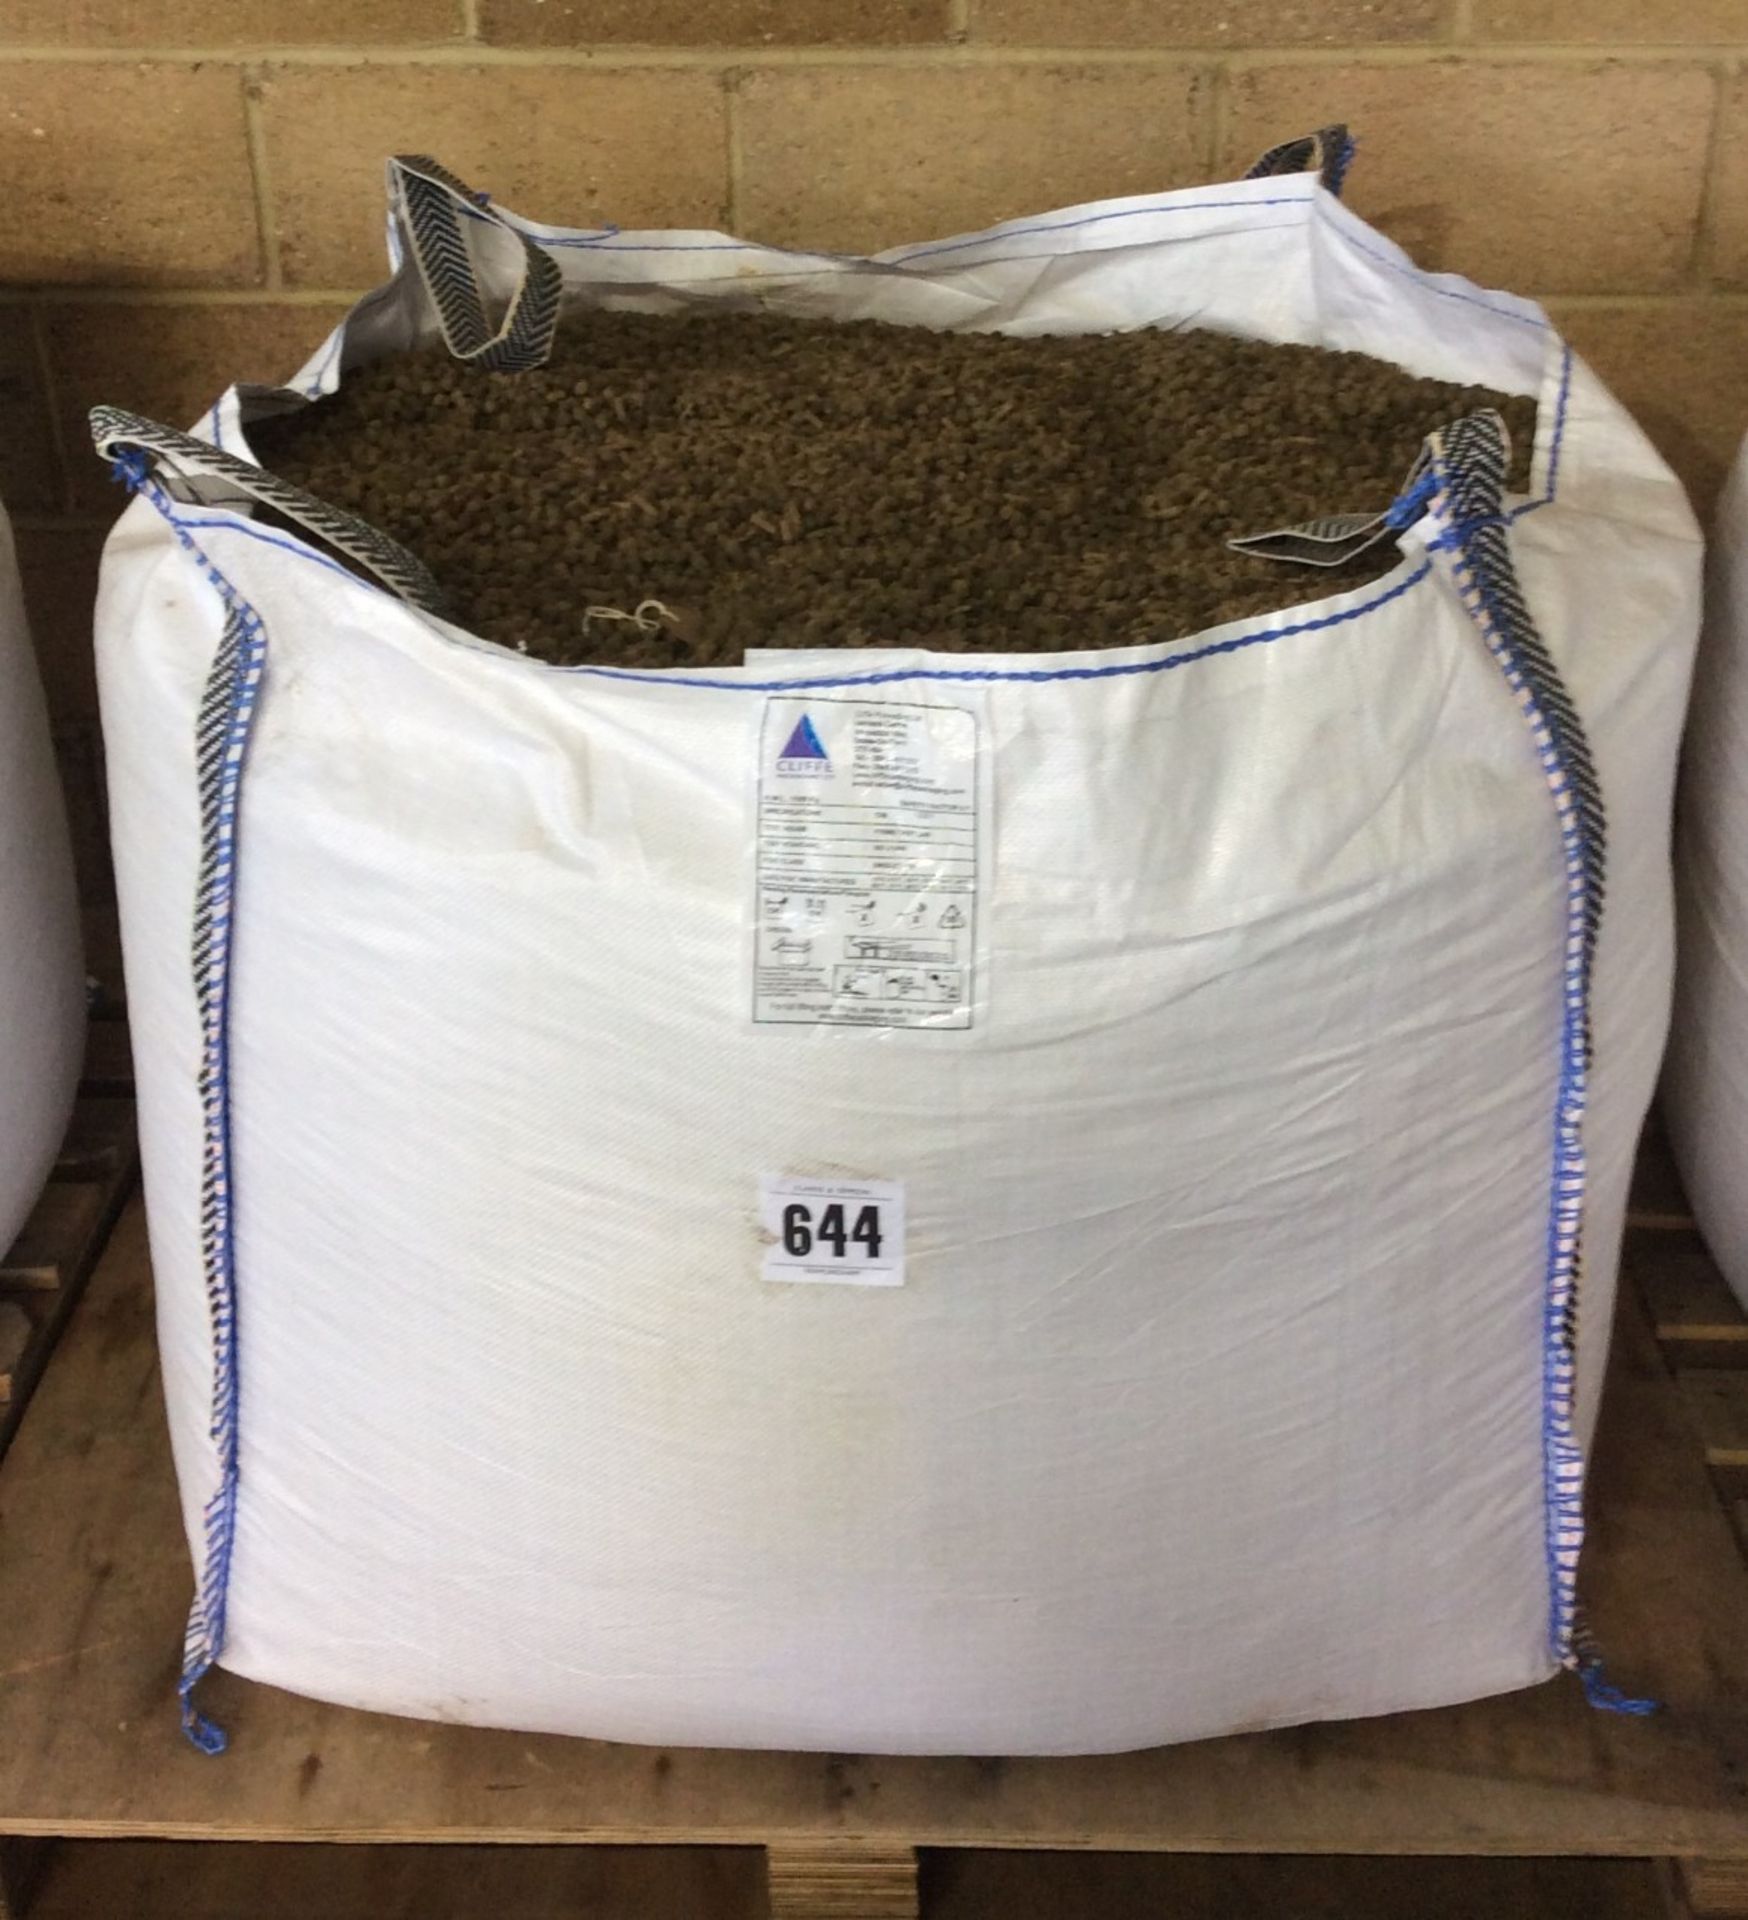 Dumpy bag of mixed pig feed (ex-damaged bags).